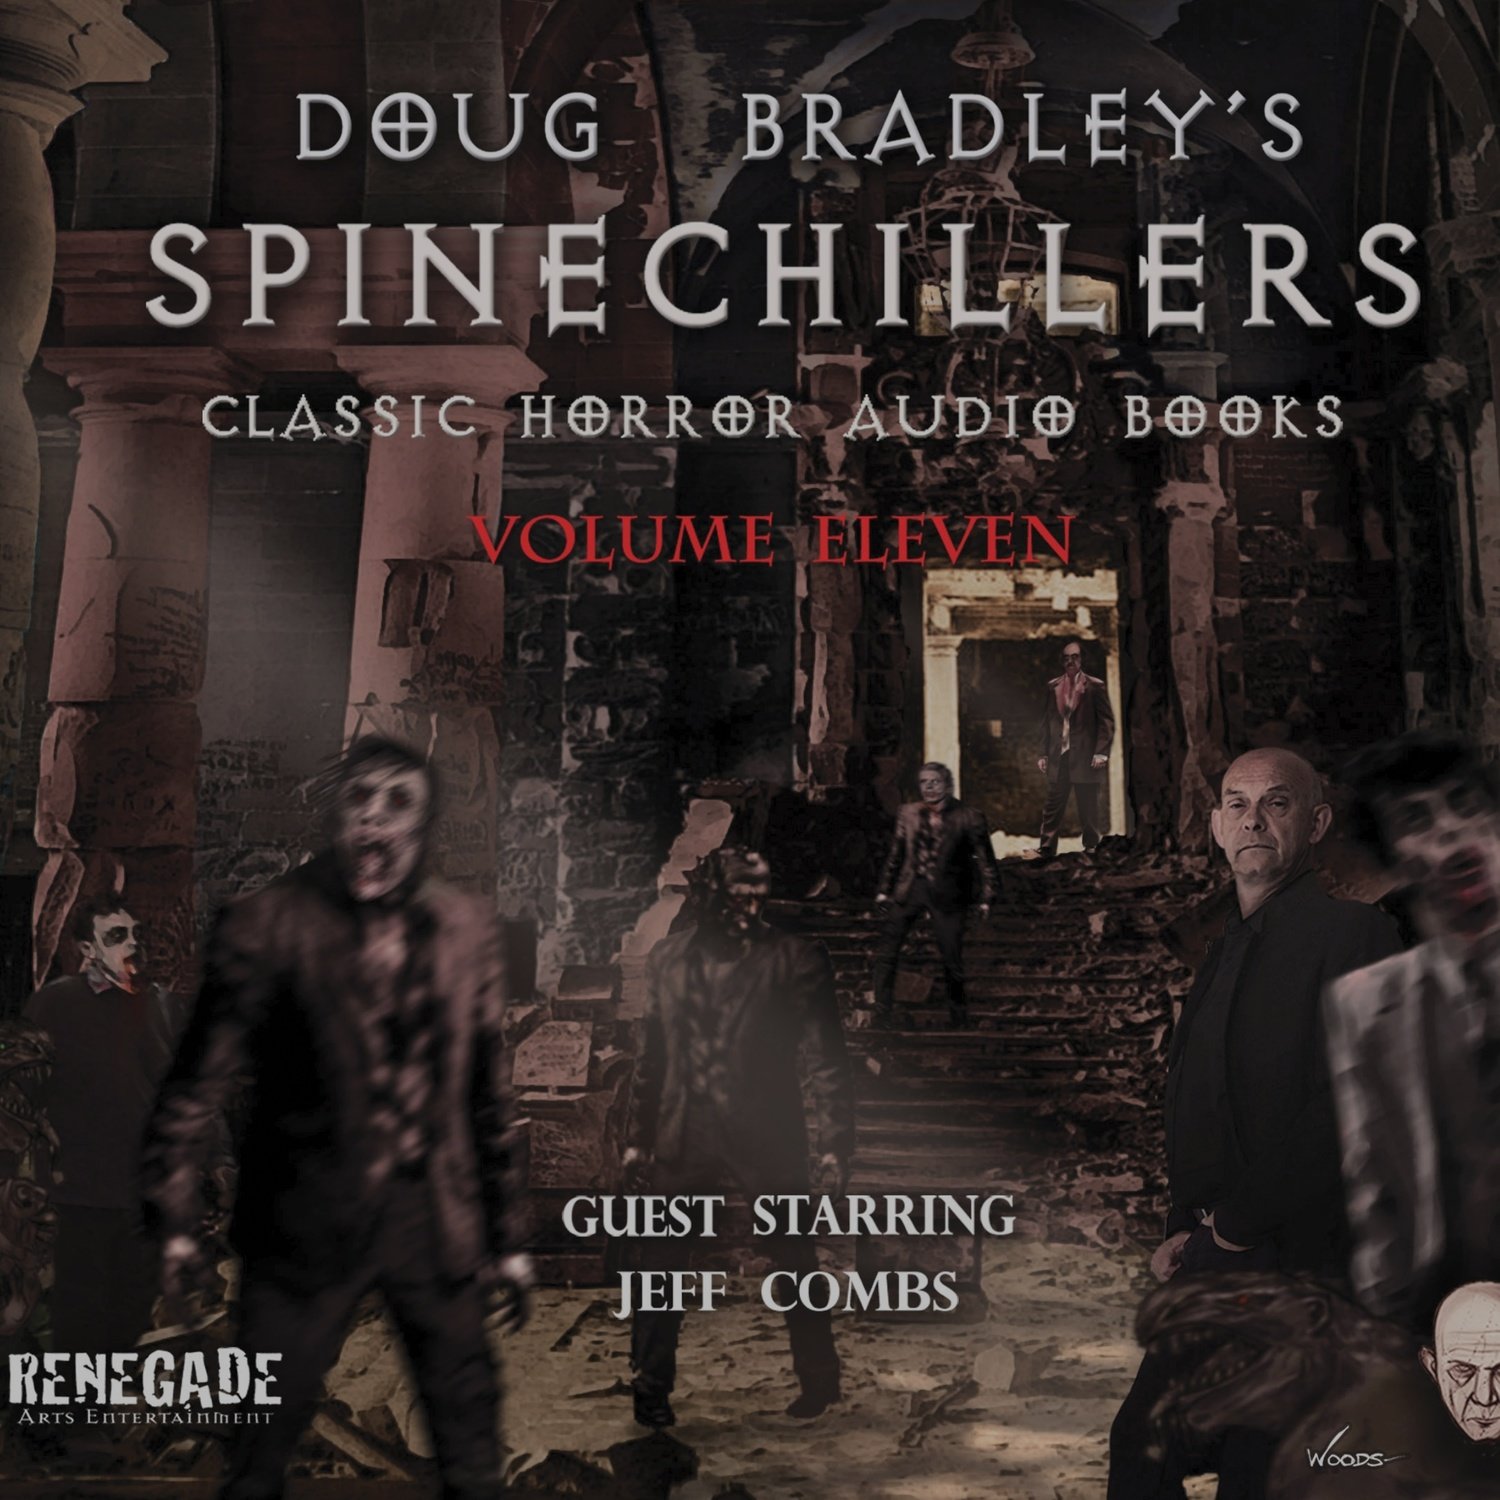 Spinechillers Volume 11